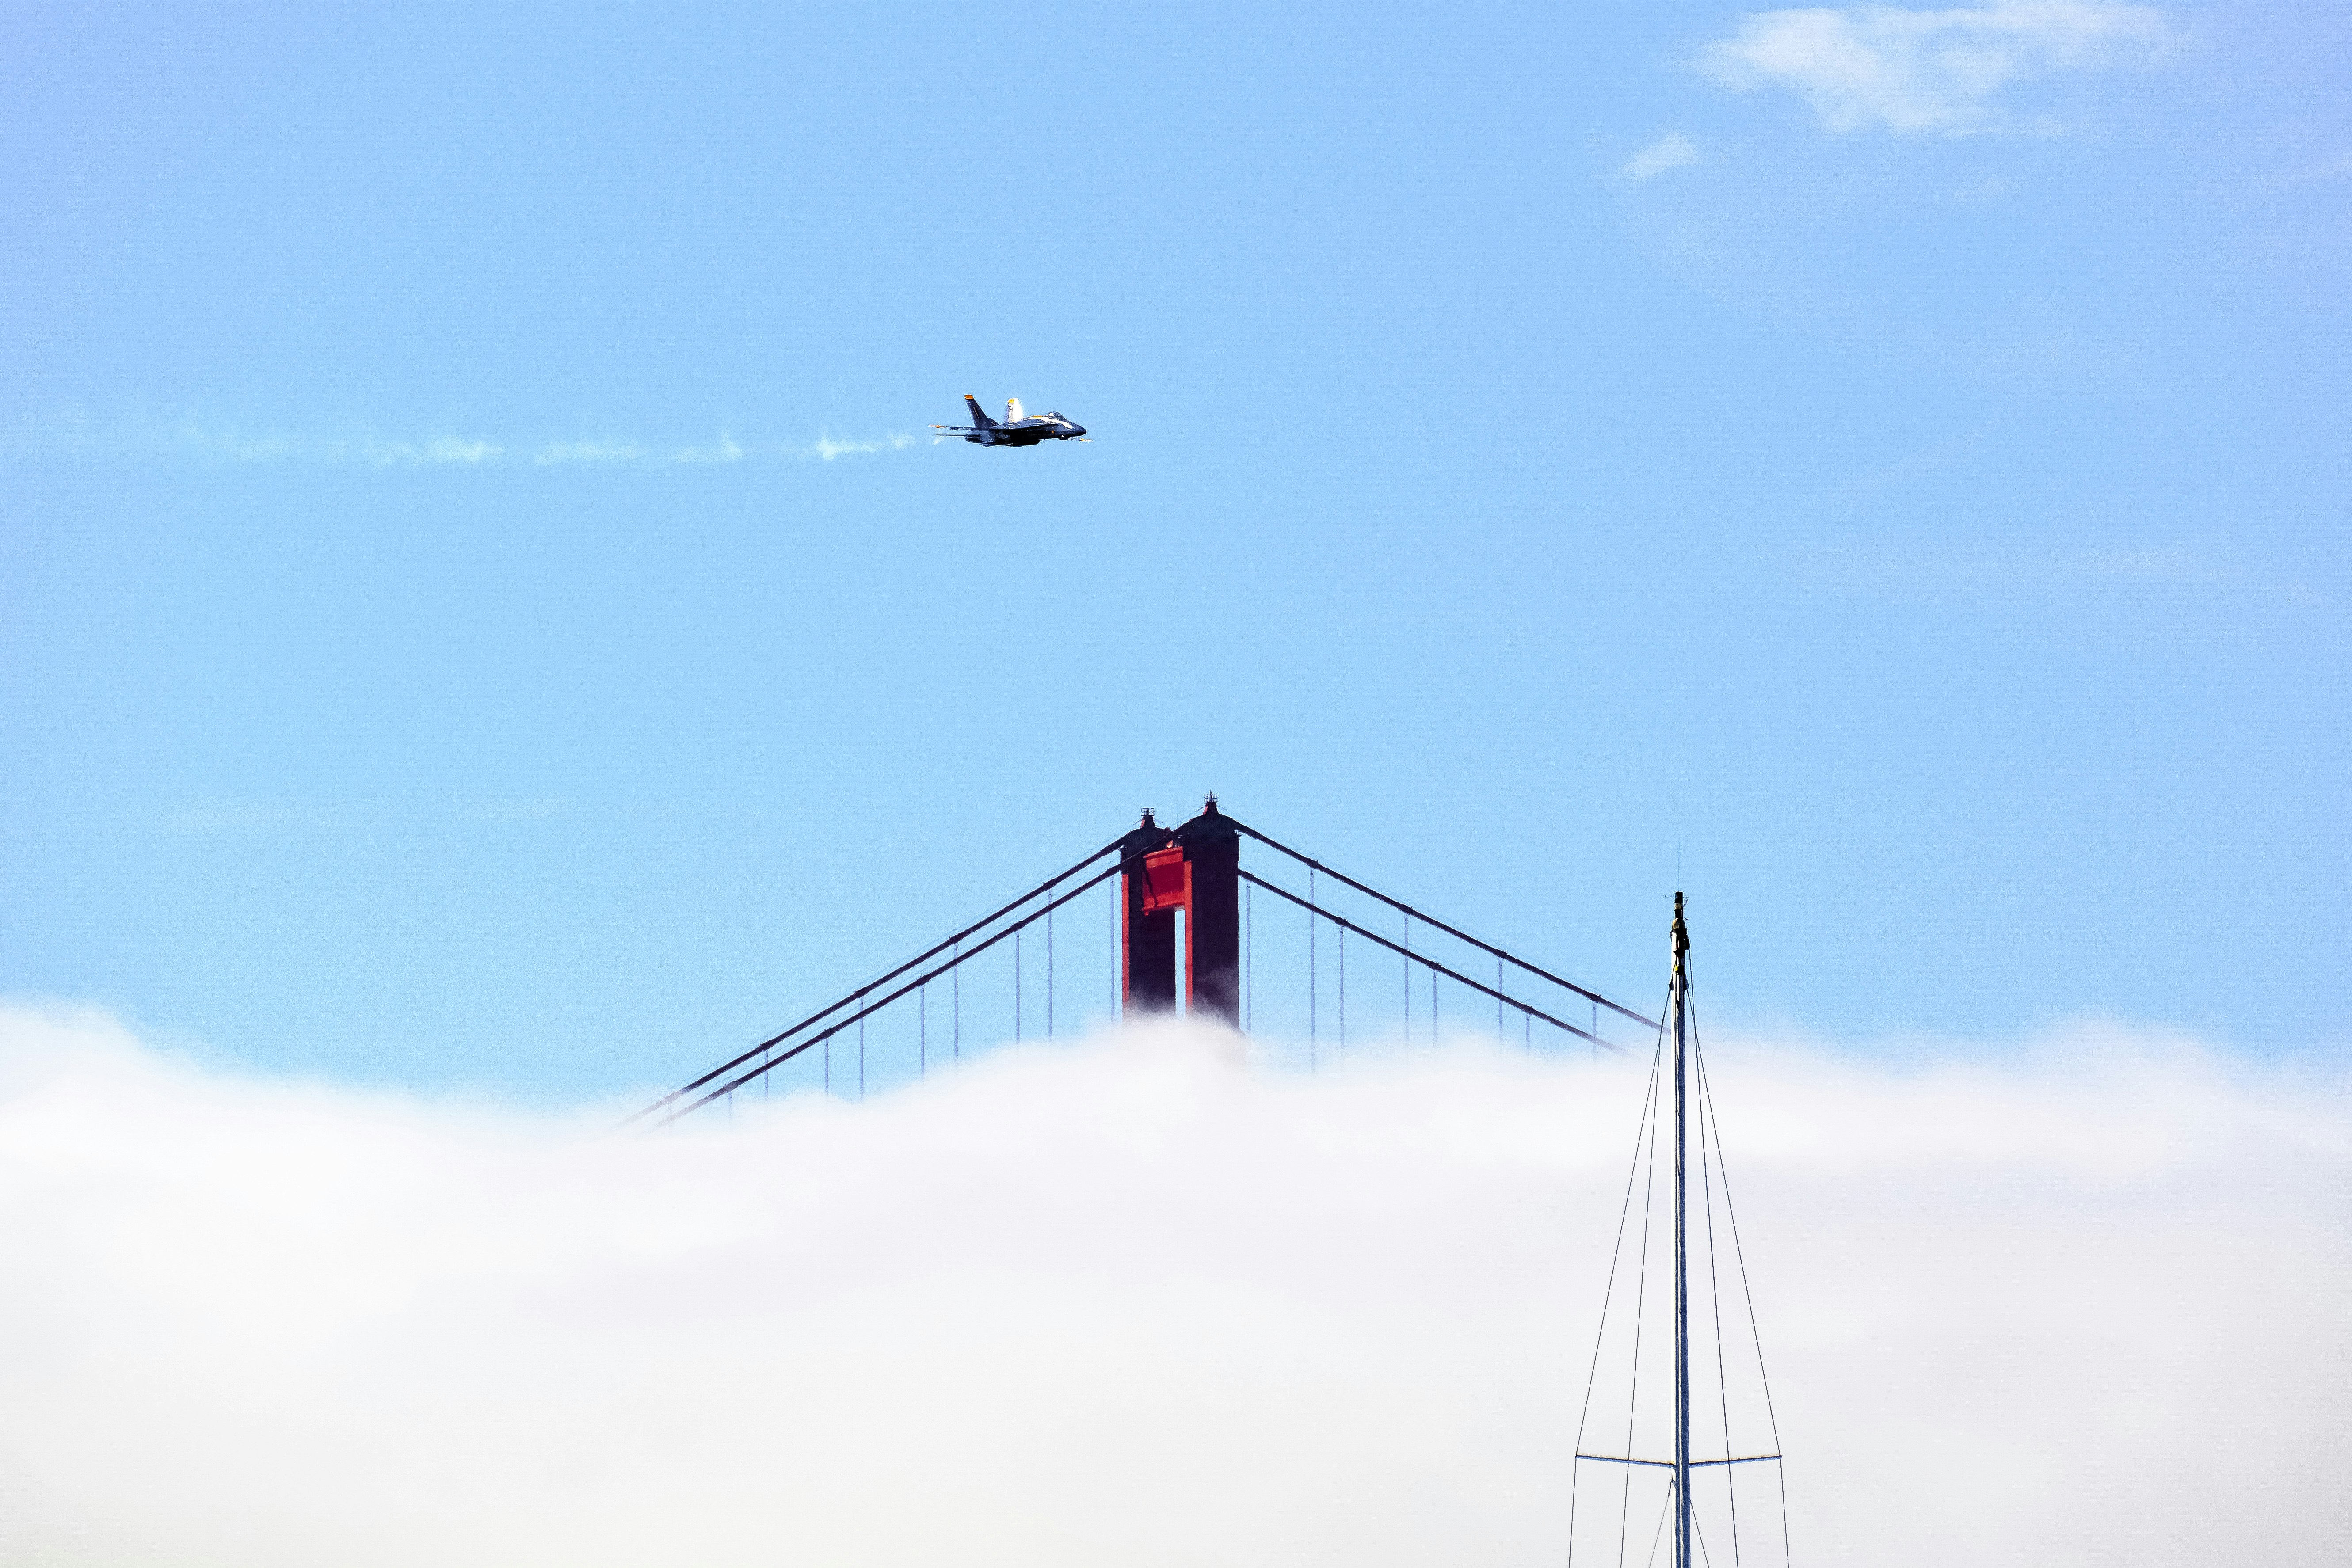 black and white airplane flying over red and white bridge under blue sky during daytime